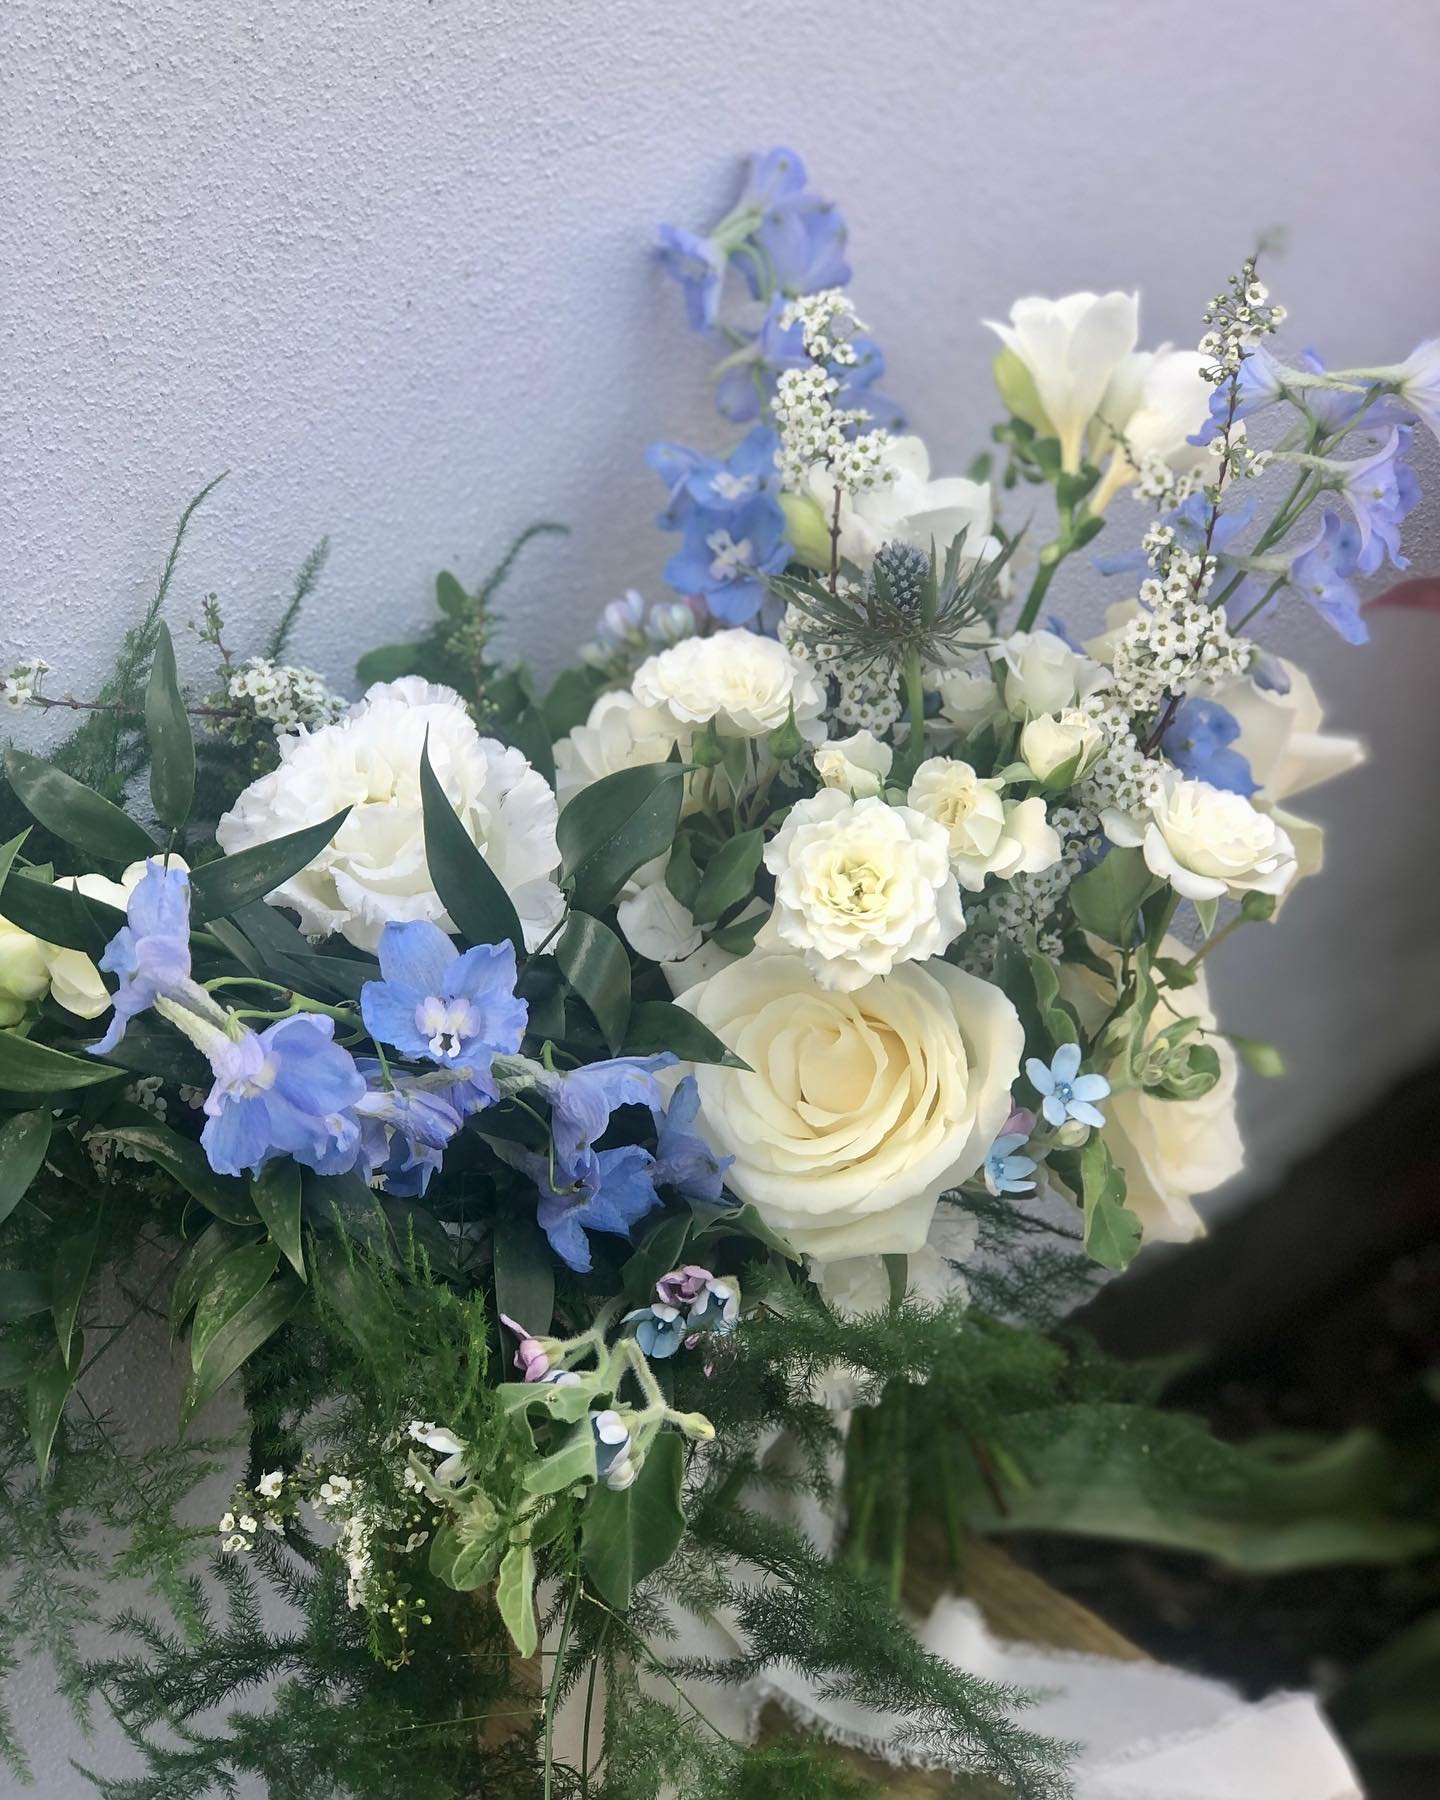 First wedding of 2024 season! R&amp;R is nice but it&rsquo;s good to be back 💙 And kicking off with a gentle white and green colour palette with a touch of pale blue &hellip; very fresh and spring like. 

The bouquet was inspired by the brides grand